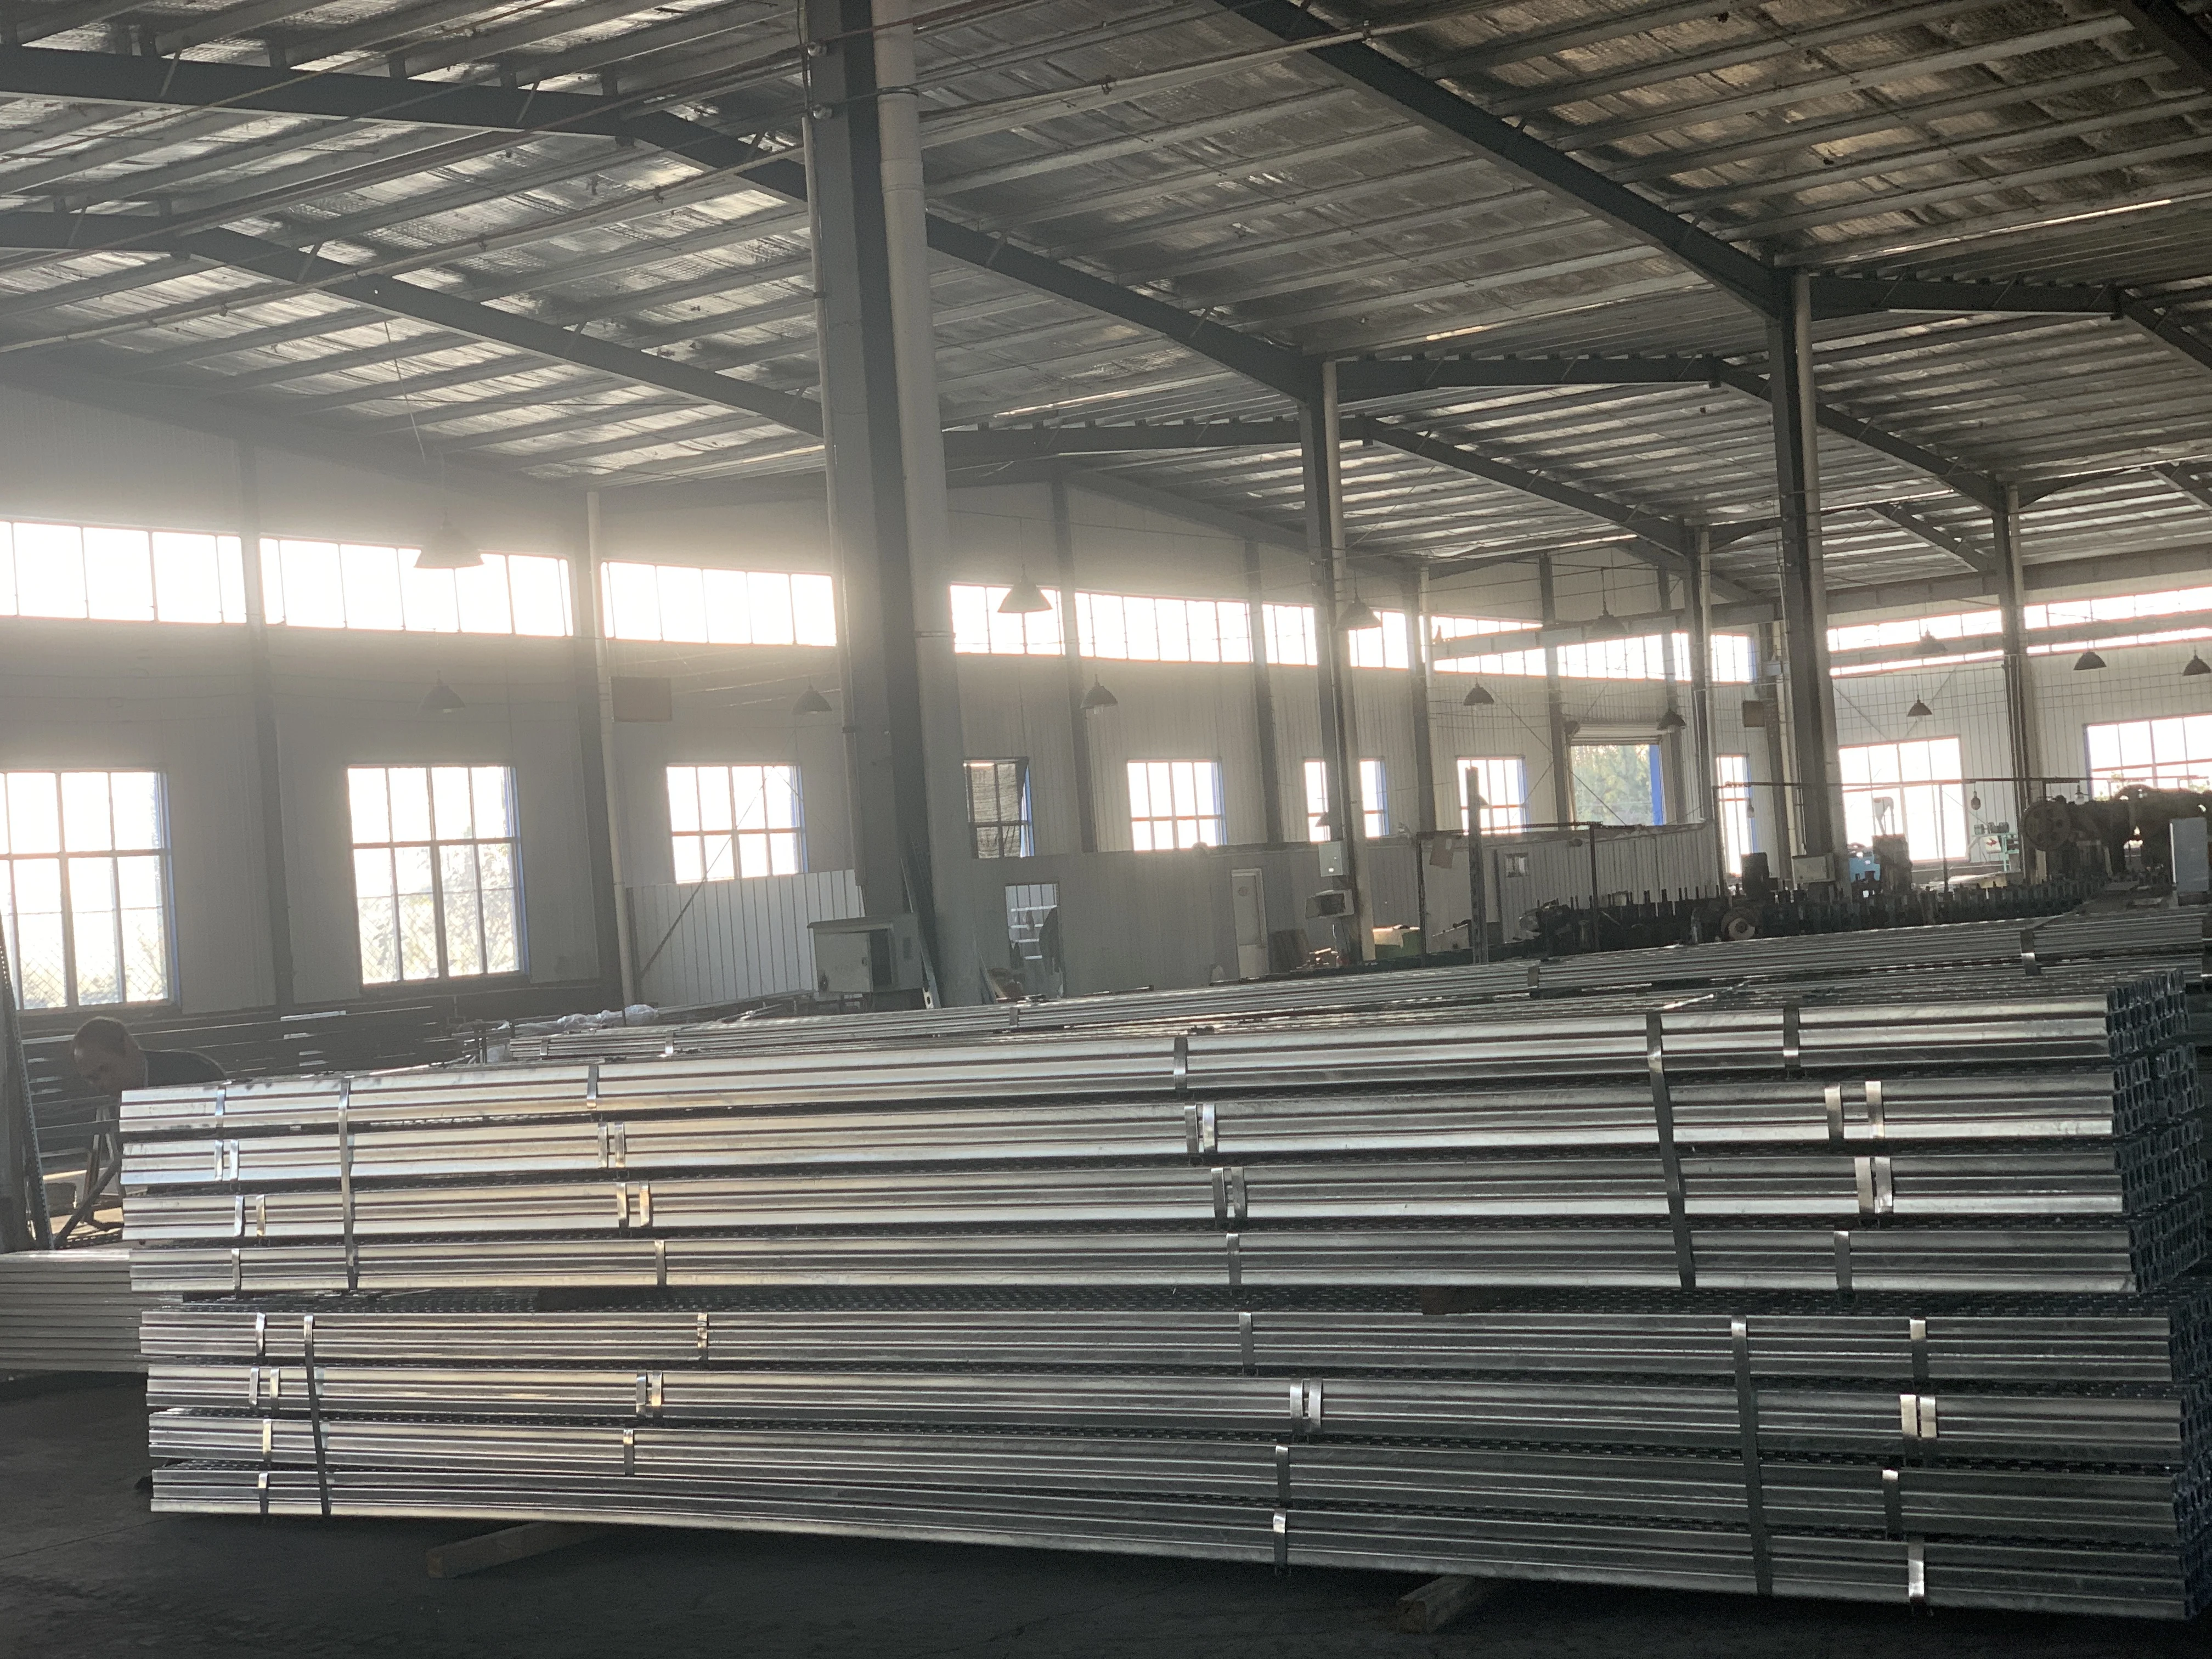 Hot dip galvanized 41x82 double channel